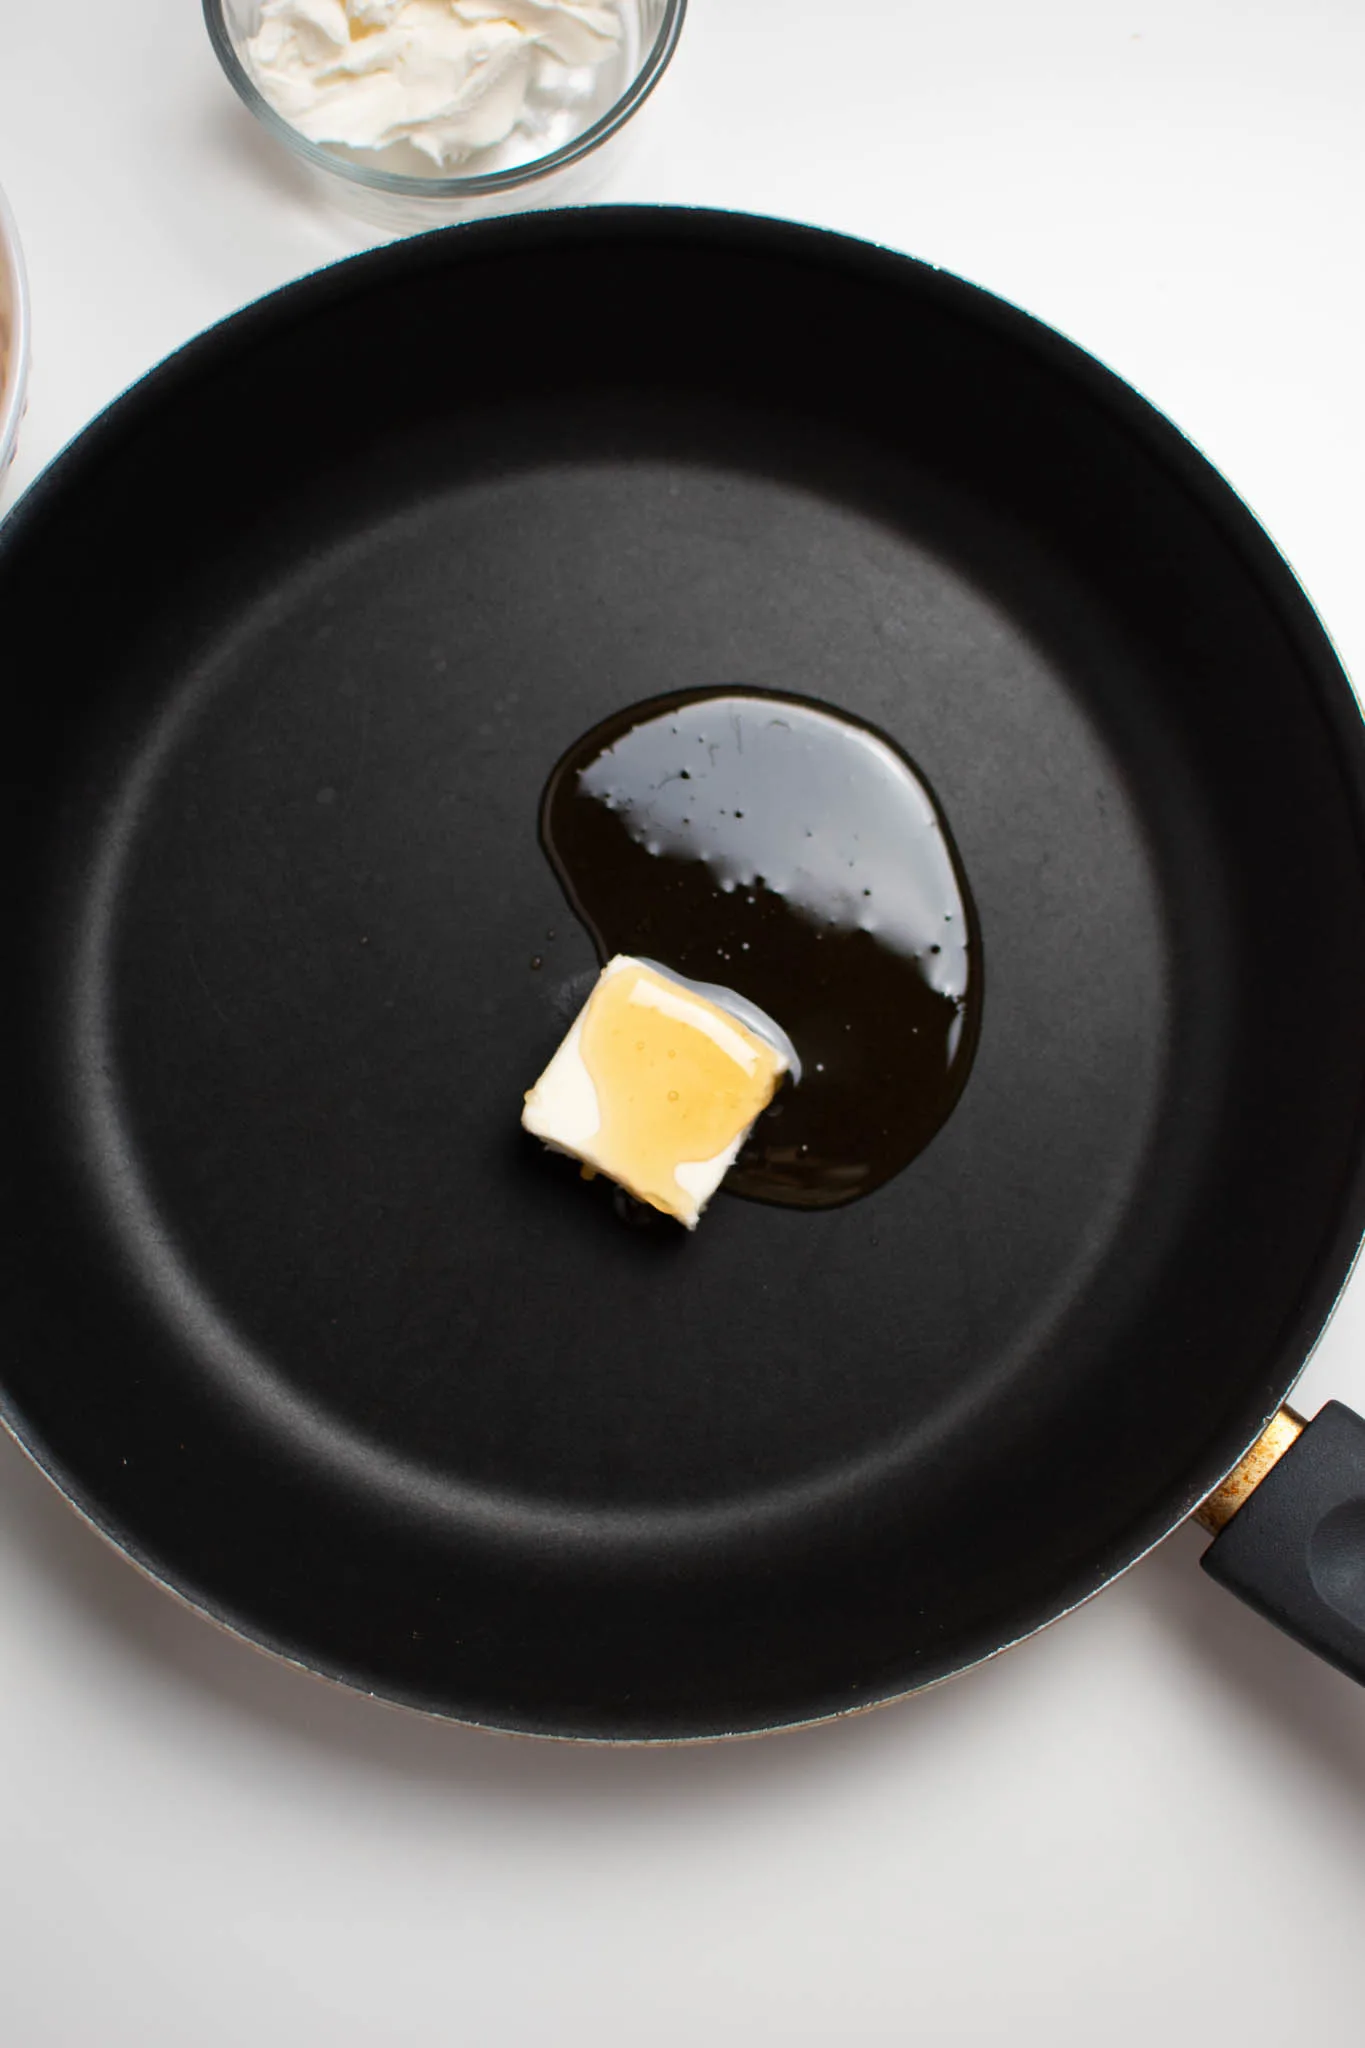 Square of butter and some honey in black frying pan on white table.